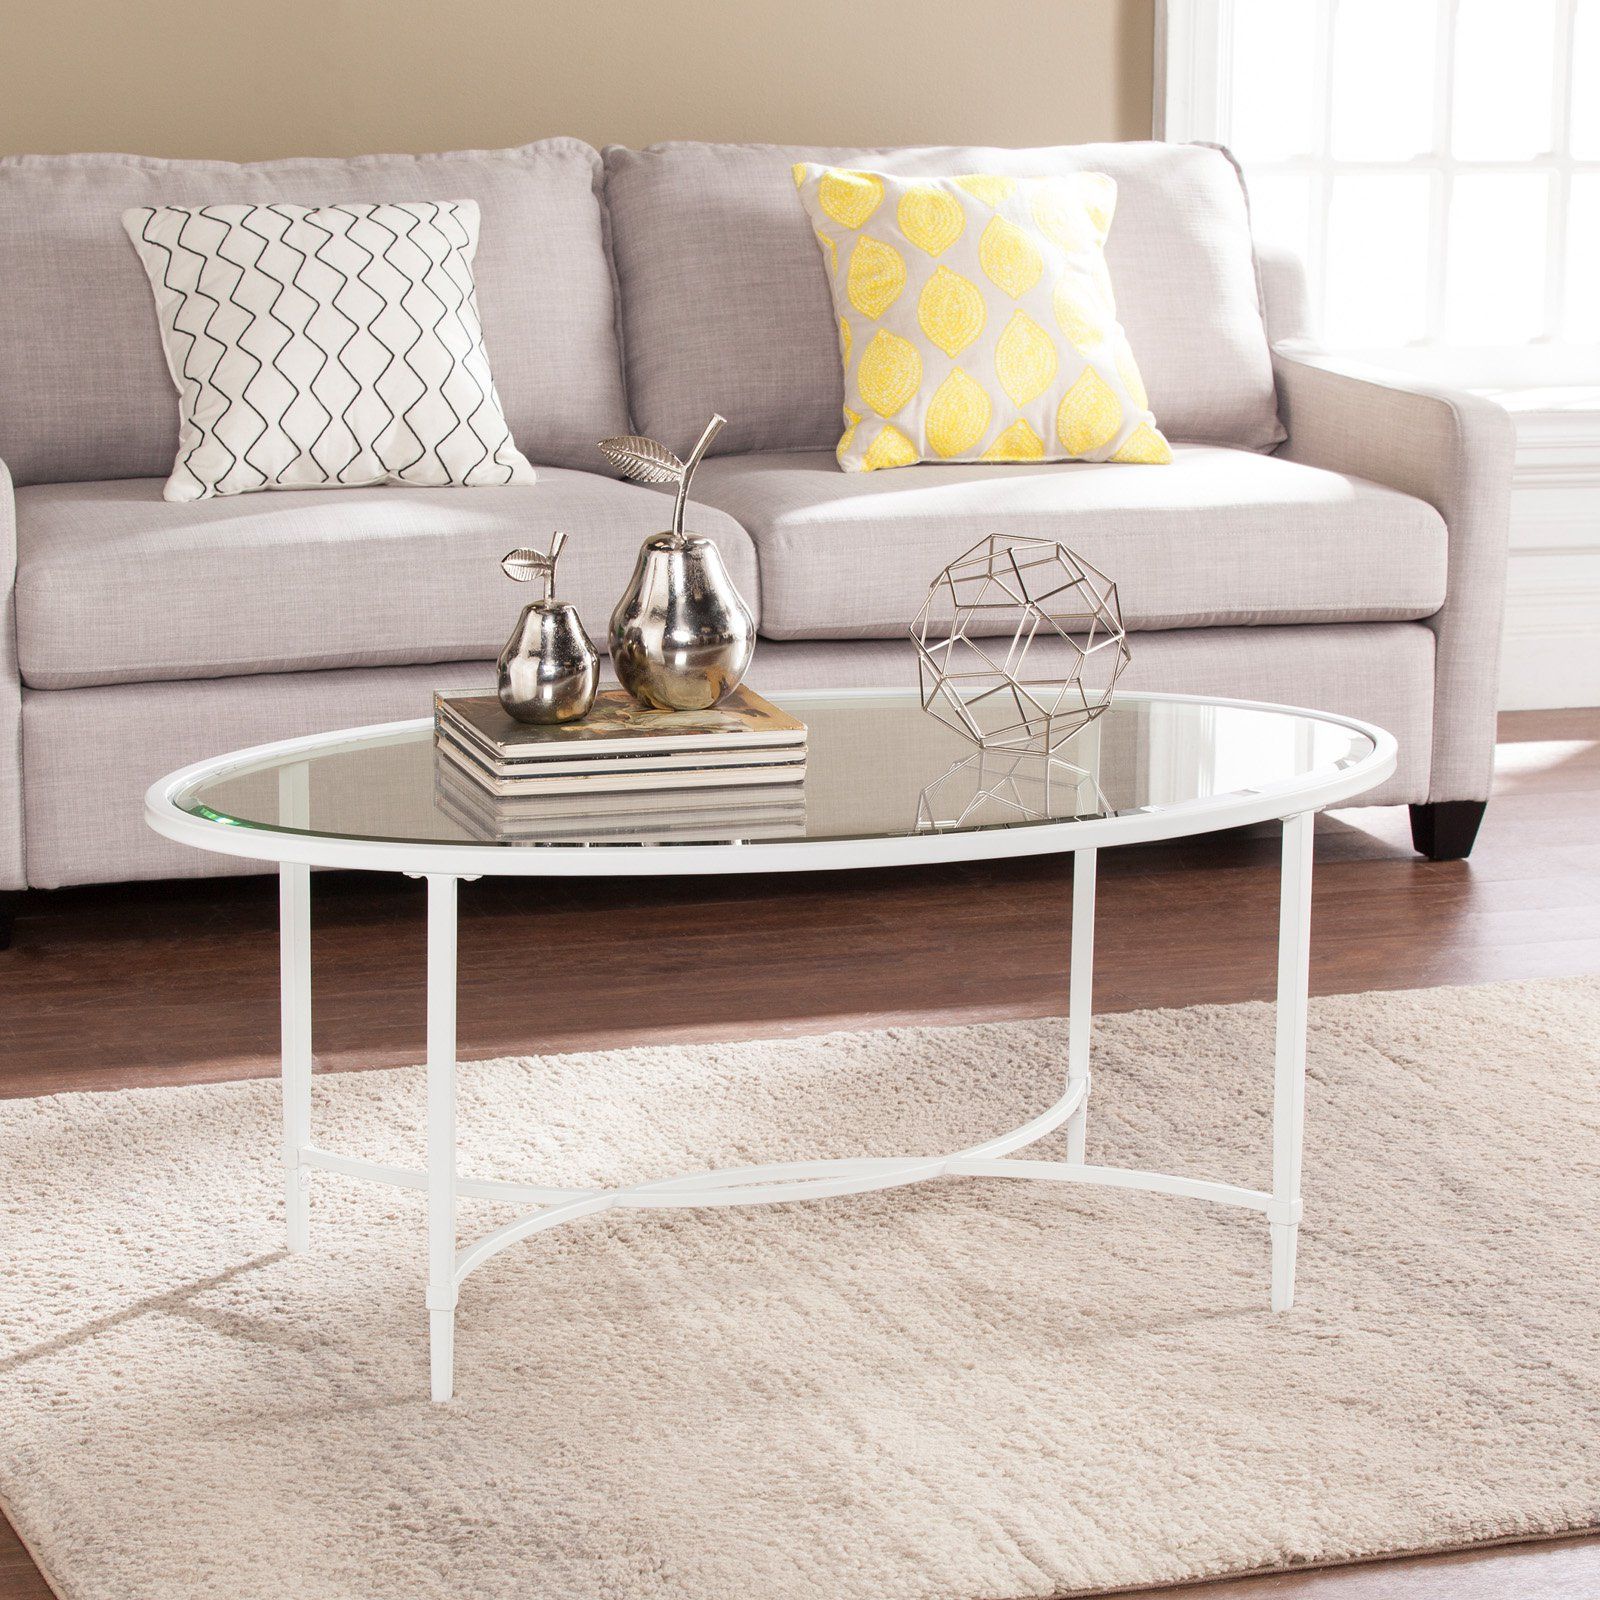 Most Recent Southern Enterprises Quinton Metal / Glass Oval Cocktail Table – White For Black Metal Cocktail Tables (View 4 of 10)